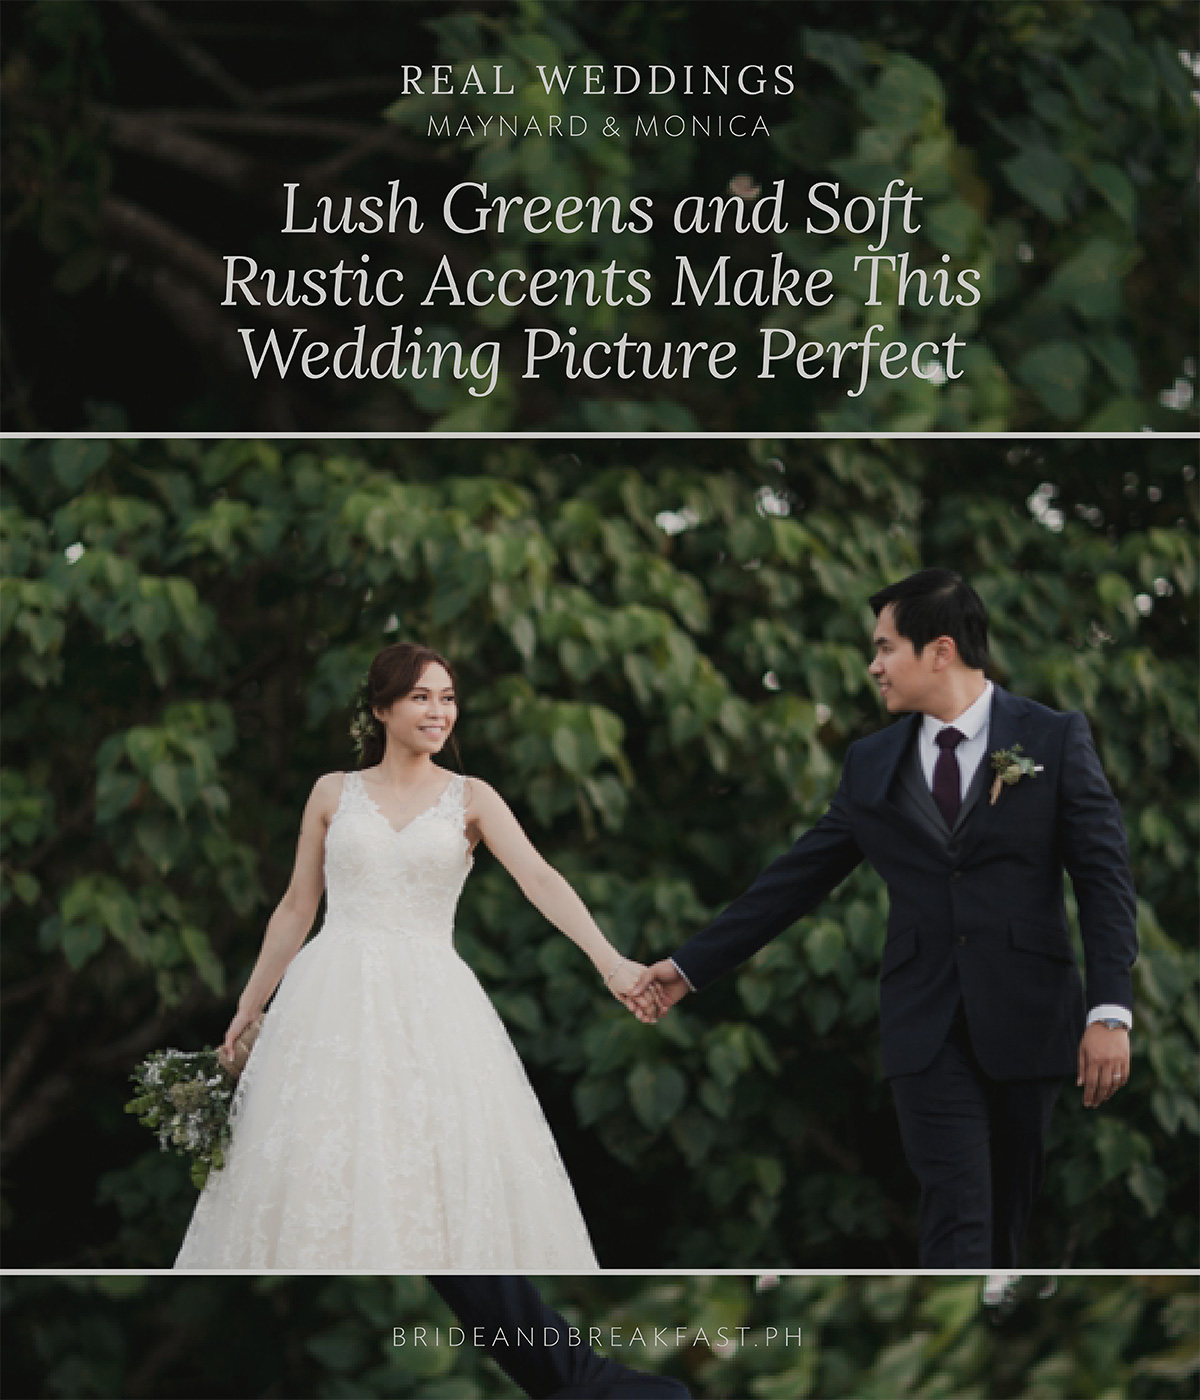 Lush Greens and Soft Rustic Accents Make This Wedding Picture Perfect